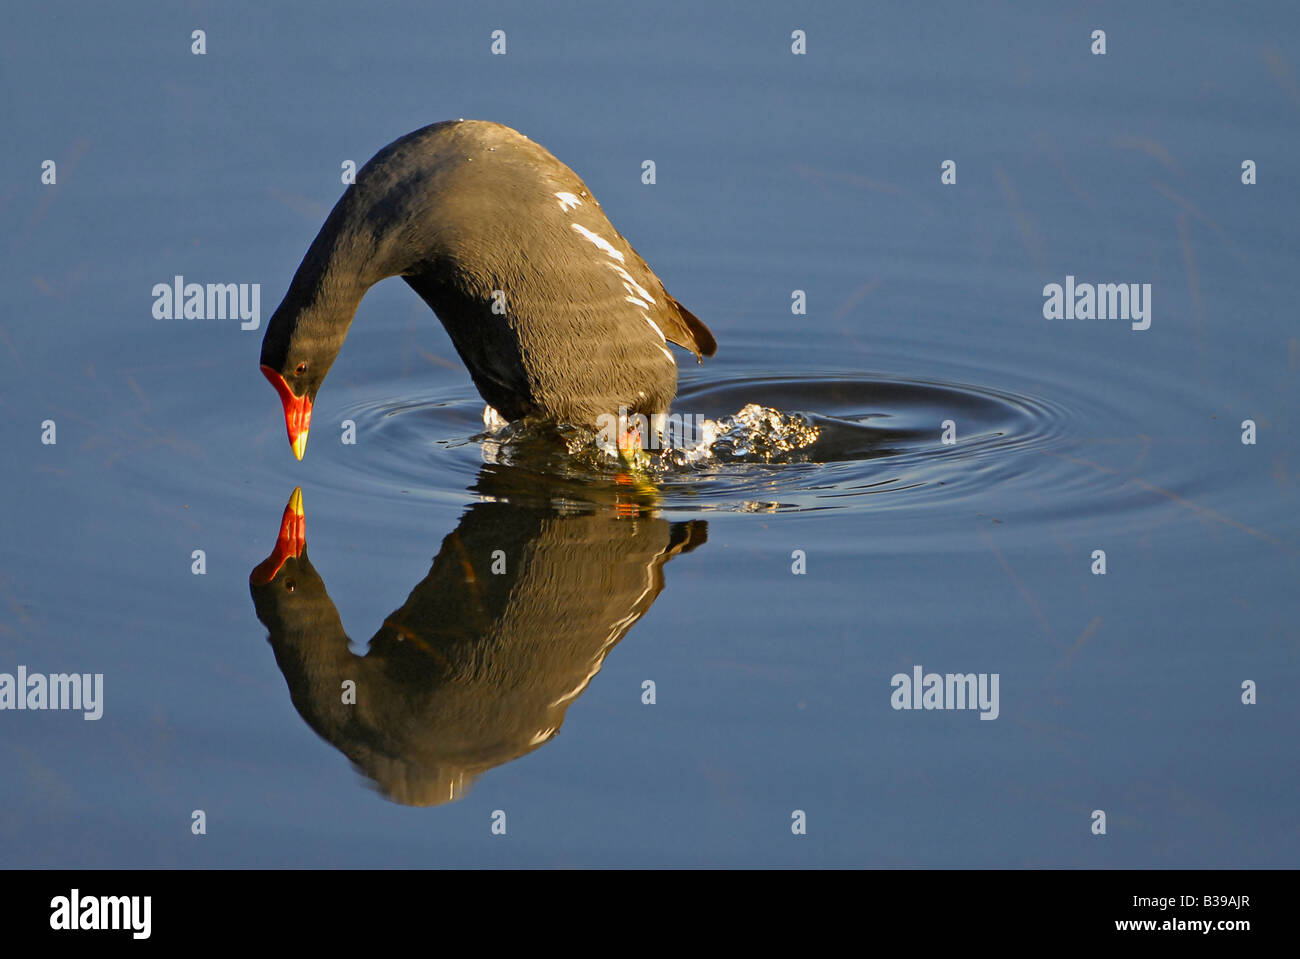 Moorhen diving under water to get fresh plants to eat, Helderberg Nature Reserve, Somerset West, Cape, South Africa Stock Photo